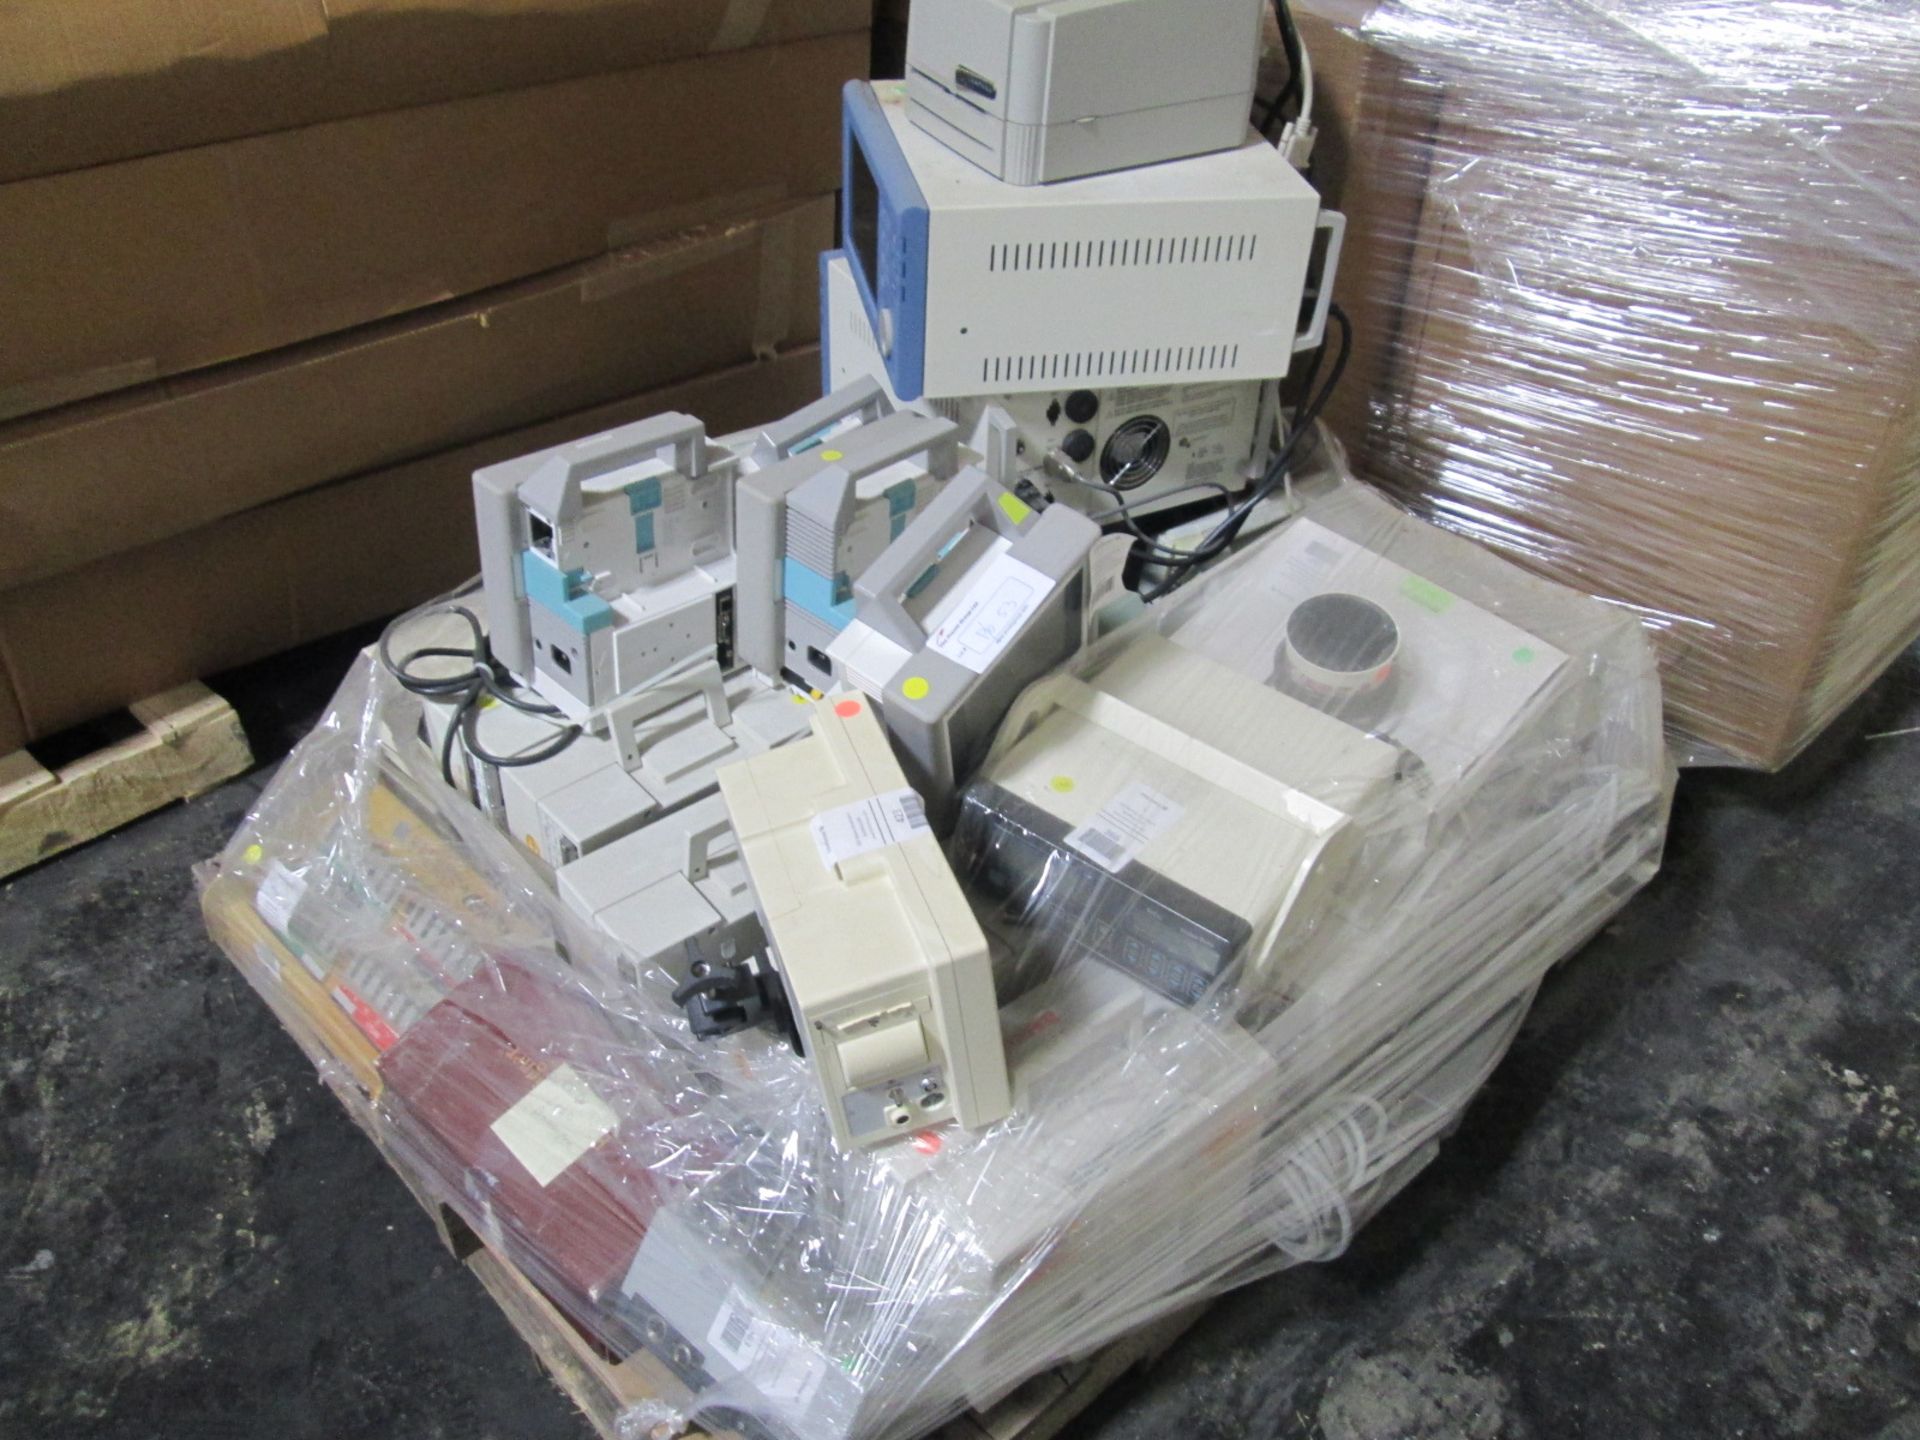 Lot of Assorted Medical Scanners, monitors, Instruments, Printers and Computers.. AS Seen in images - Image 15 of 26